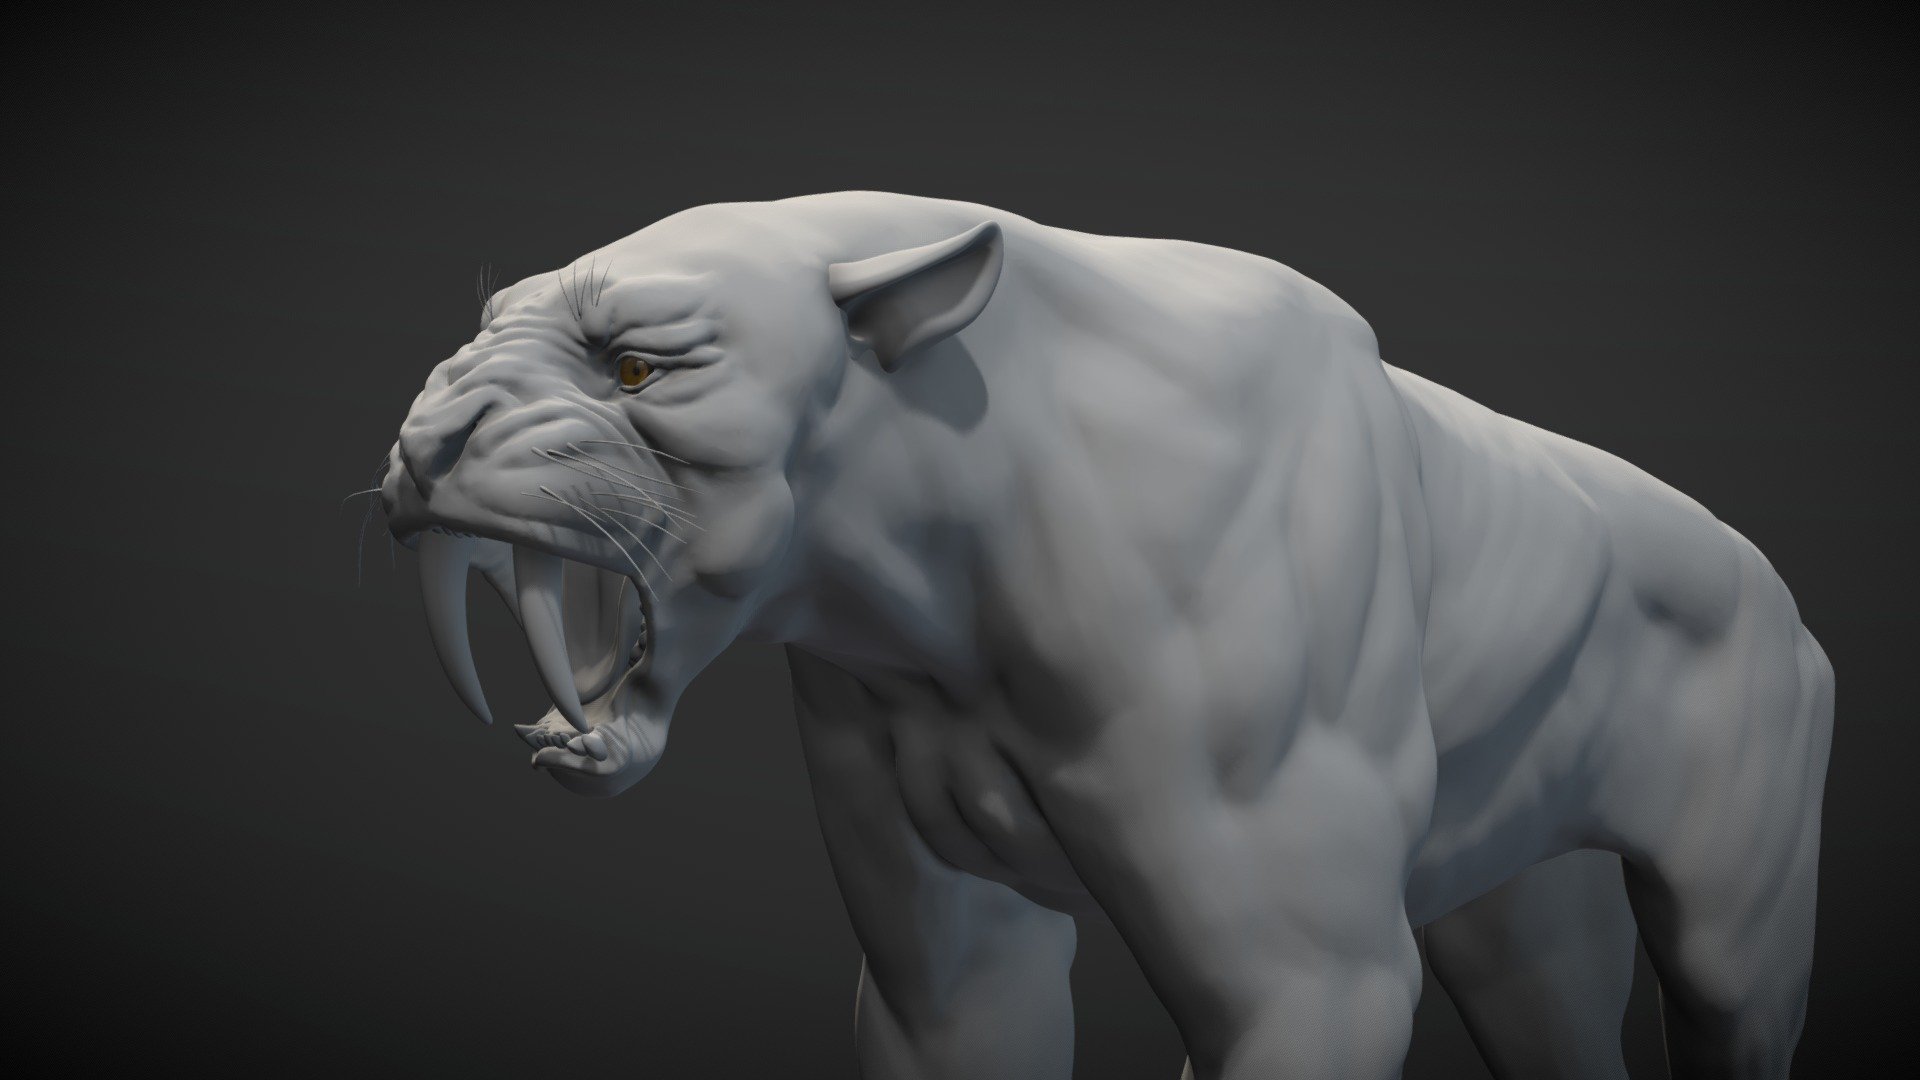 Saber-toothed big cat sculpted in ZBrush.
Hope you like it 3d model